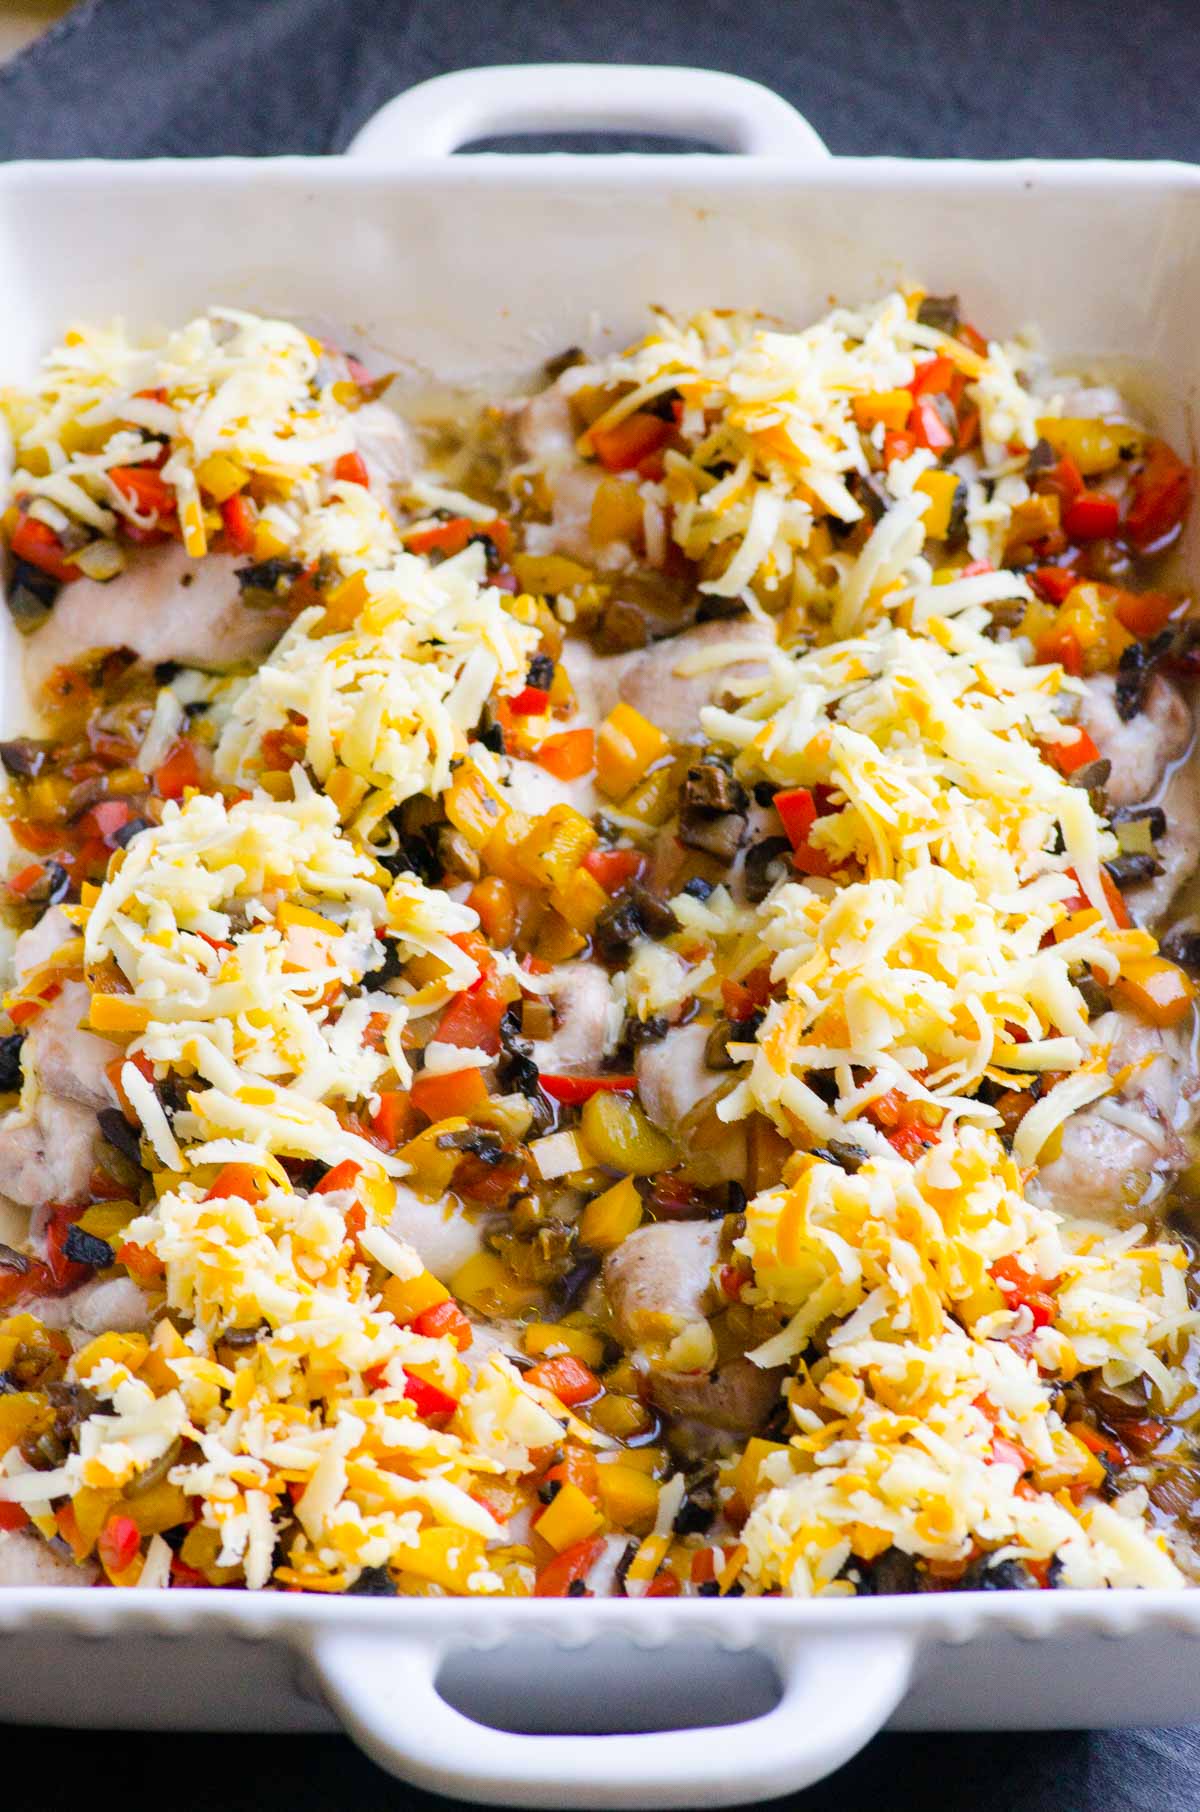 Chicken baked and topped with sauteed veggies and shredded cheese.